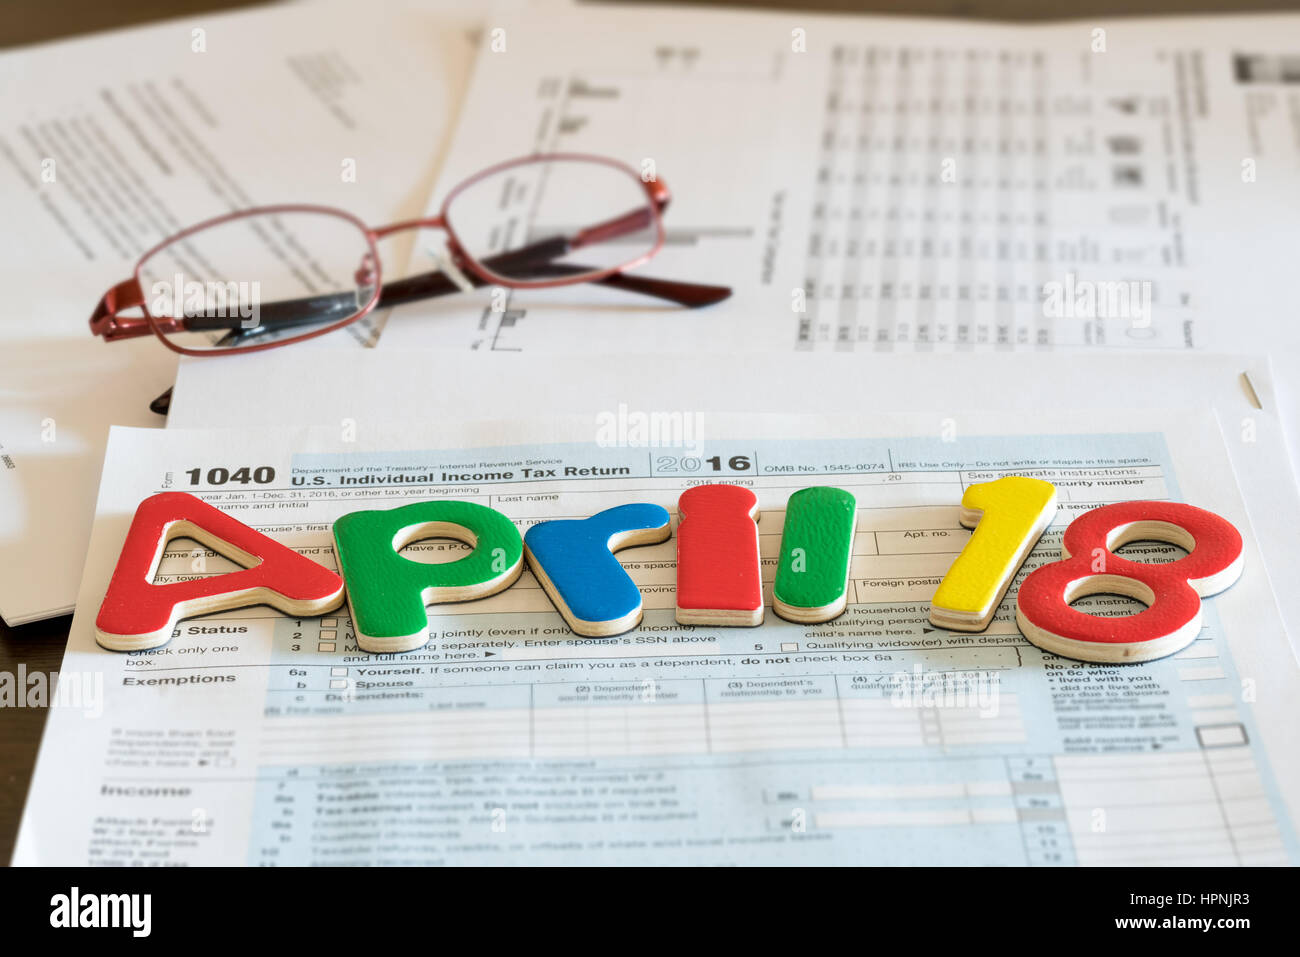 Wooden letters on top of 1040 income tax form for 2016 showing tax day for filing is April 18 2017 Stock Photo